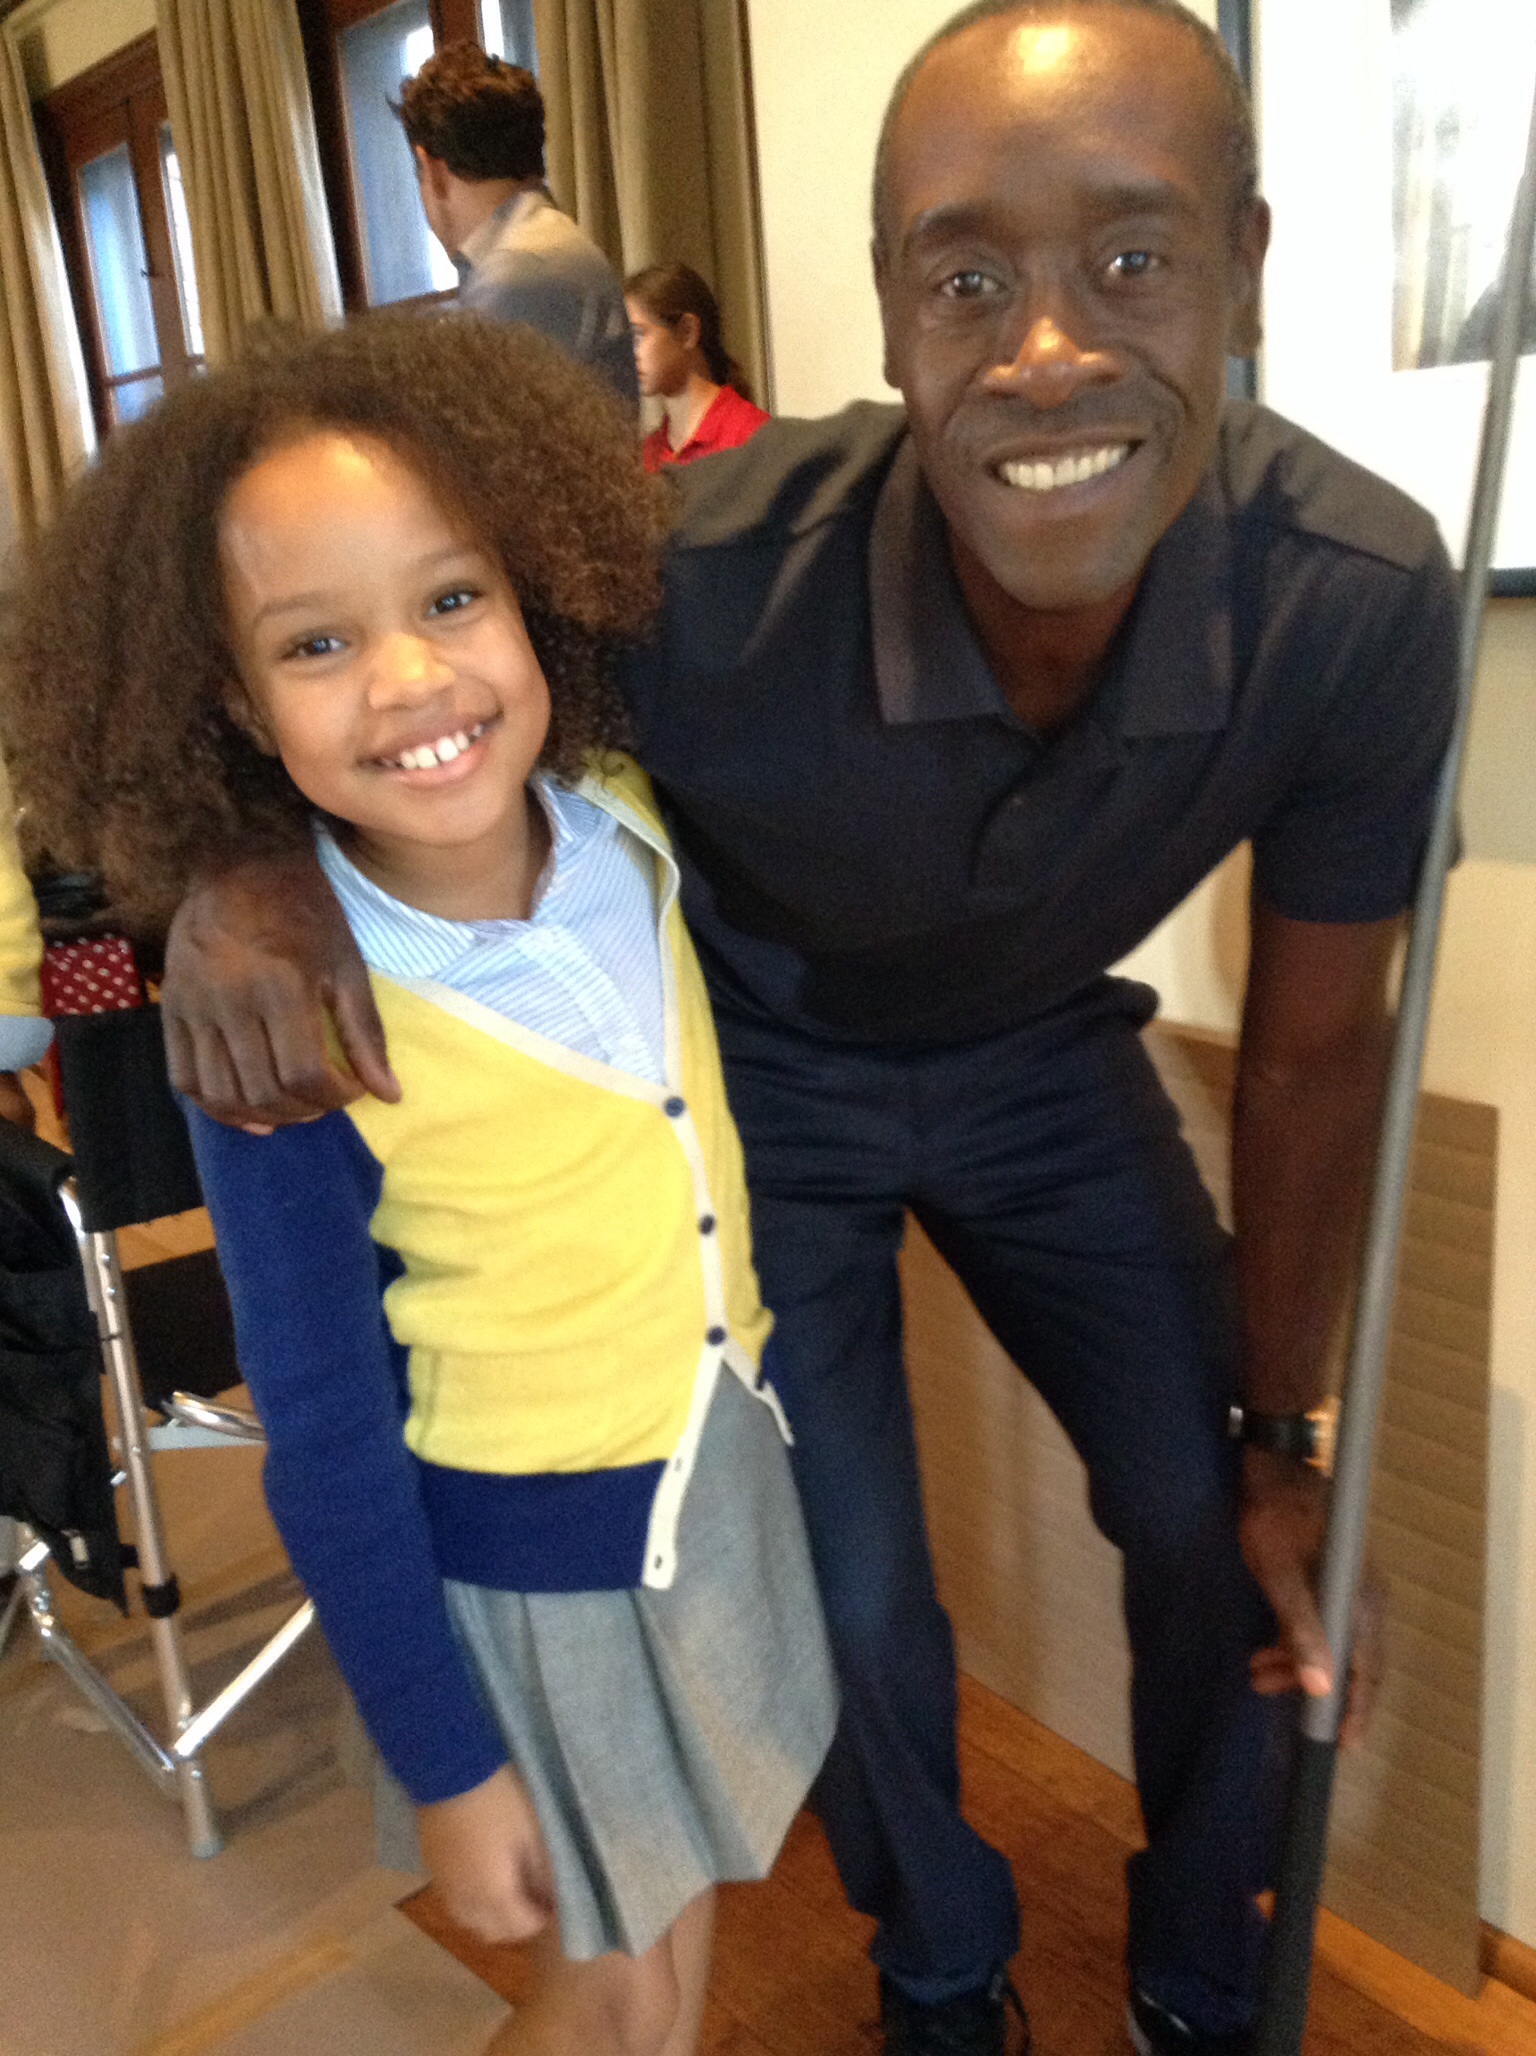 Brooklyn-Bella on set of 'House of Lies' with Mr. Don Cheadle